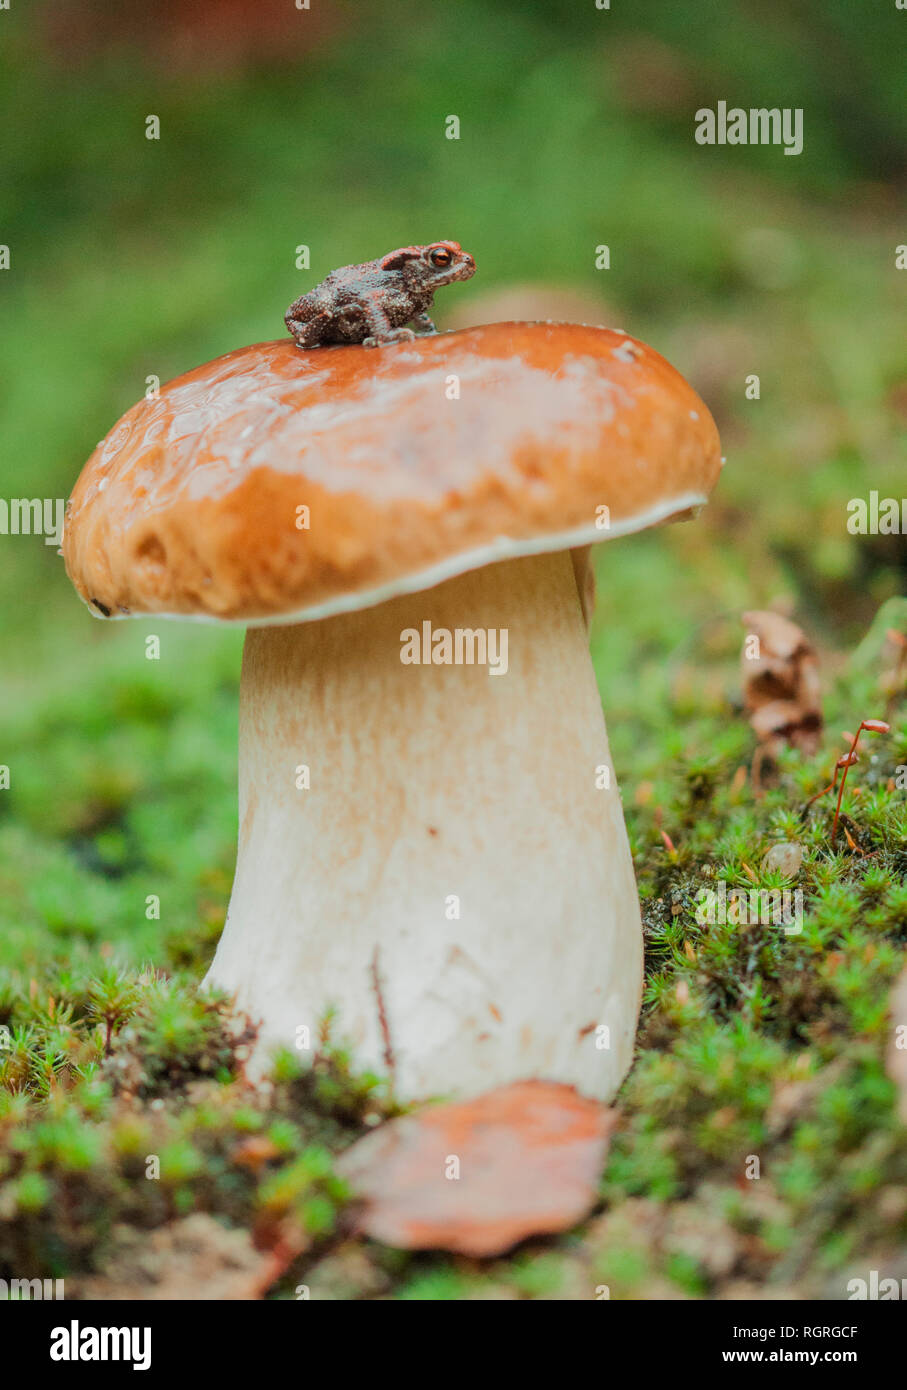 Young Common Toad on Cep Bun, Saxony, Germany, Europe, Bufo bufo Stock Photo